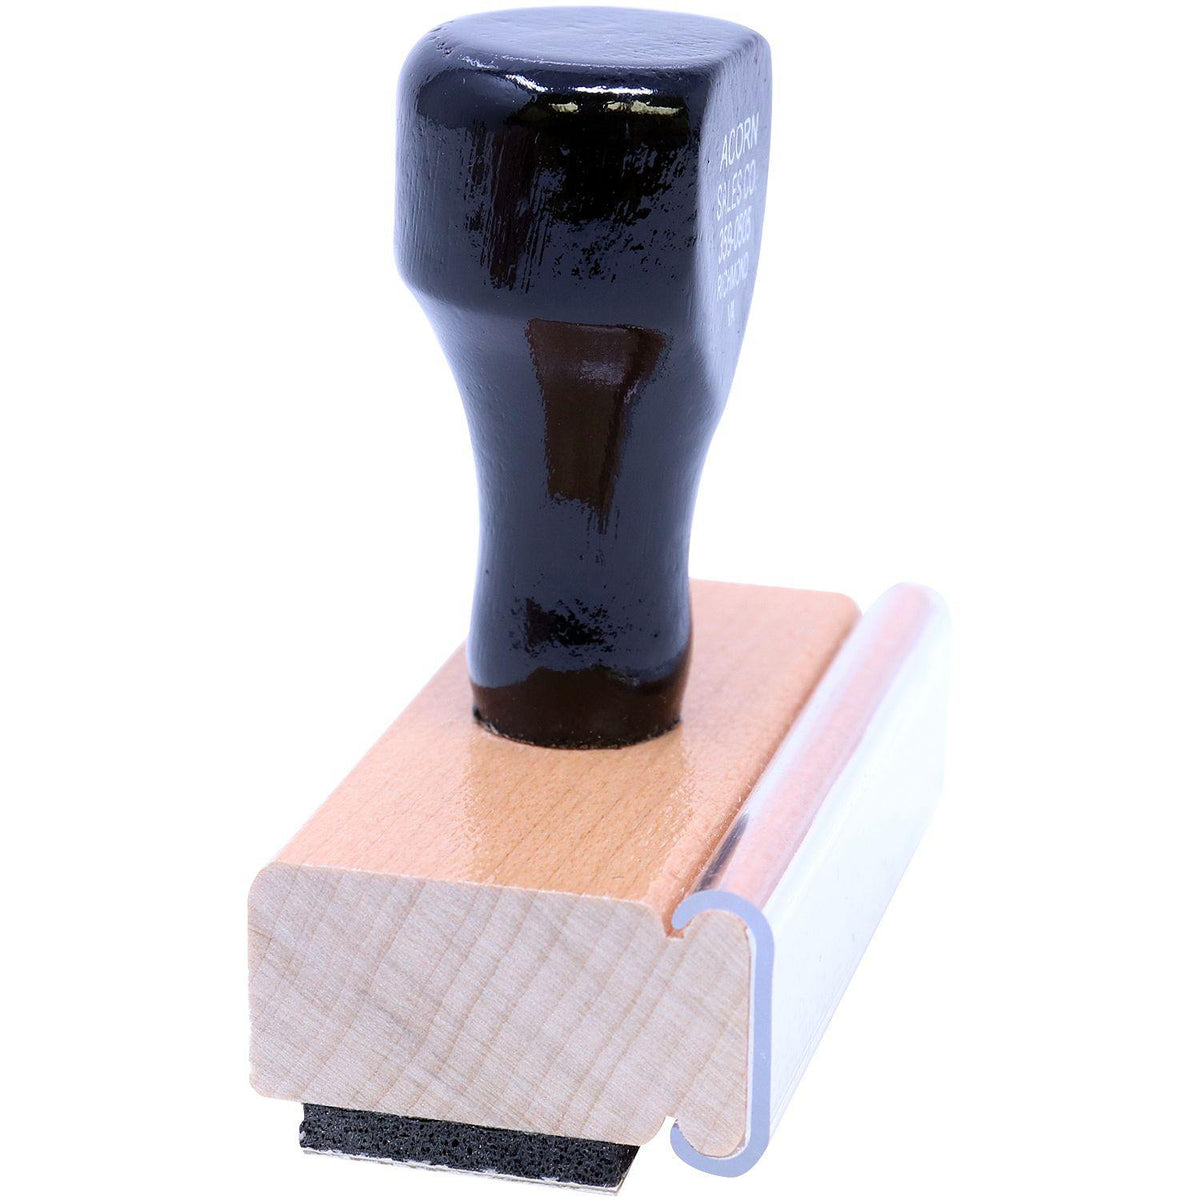 Side View of Large Petitioner Rubber Stamp at an Angle